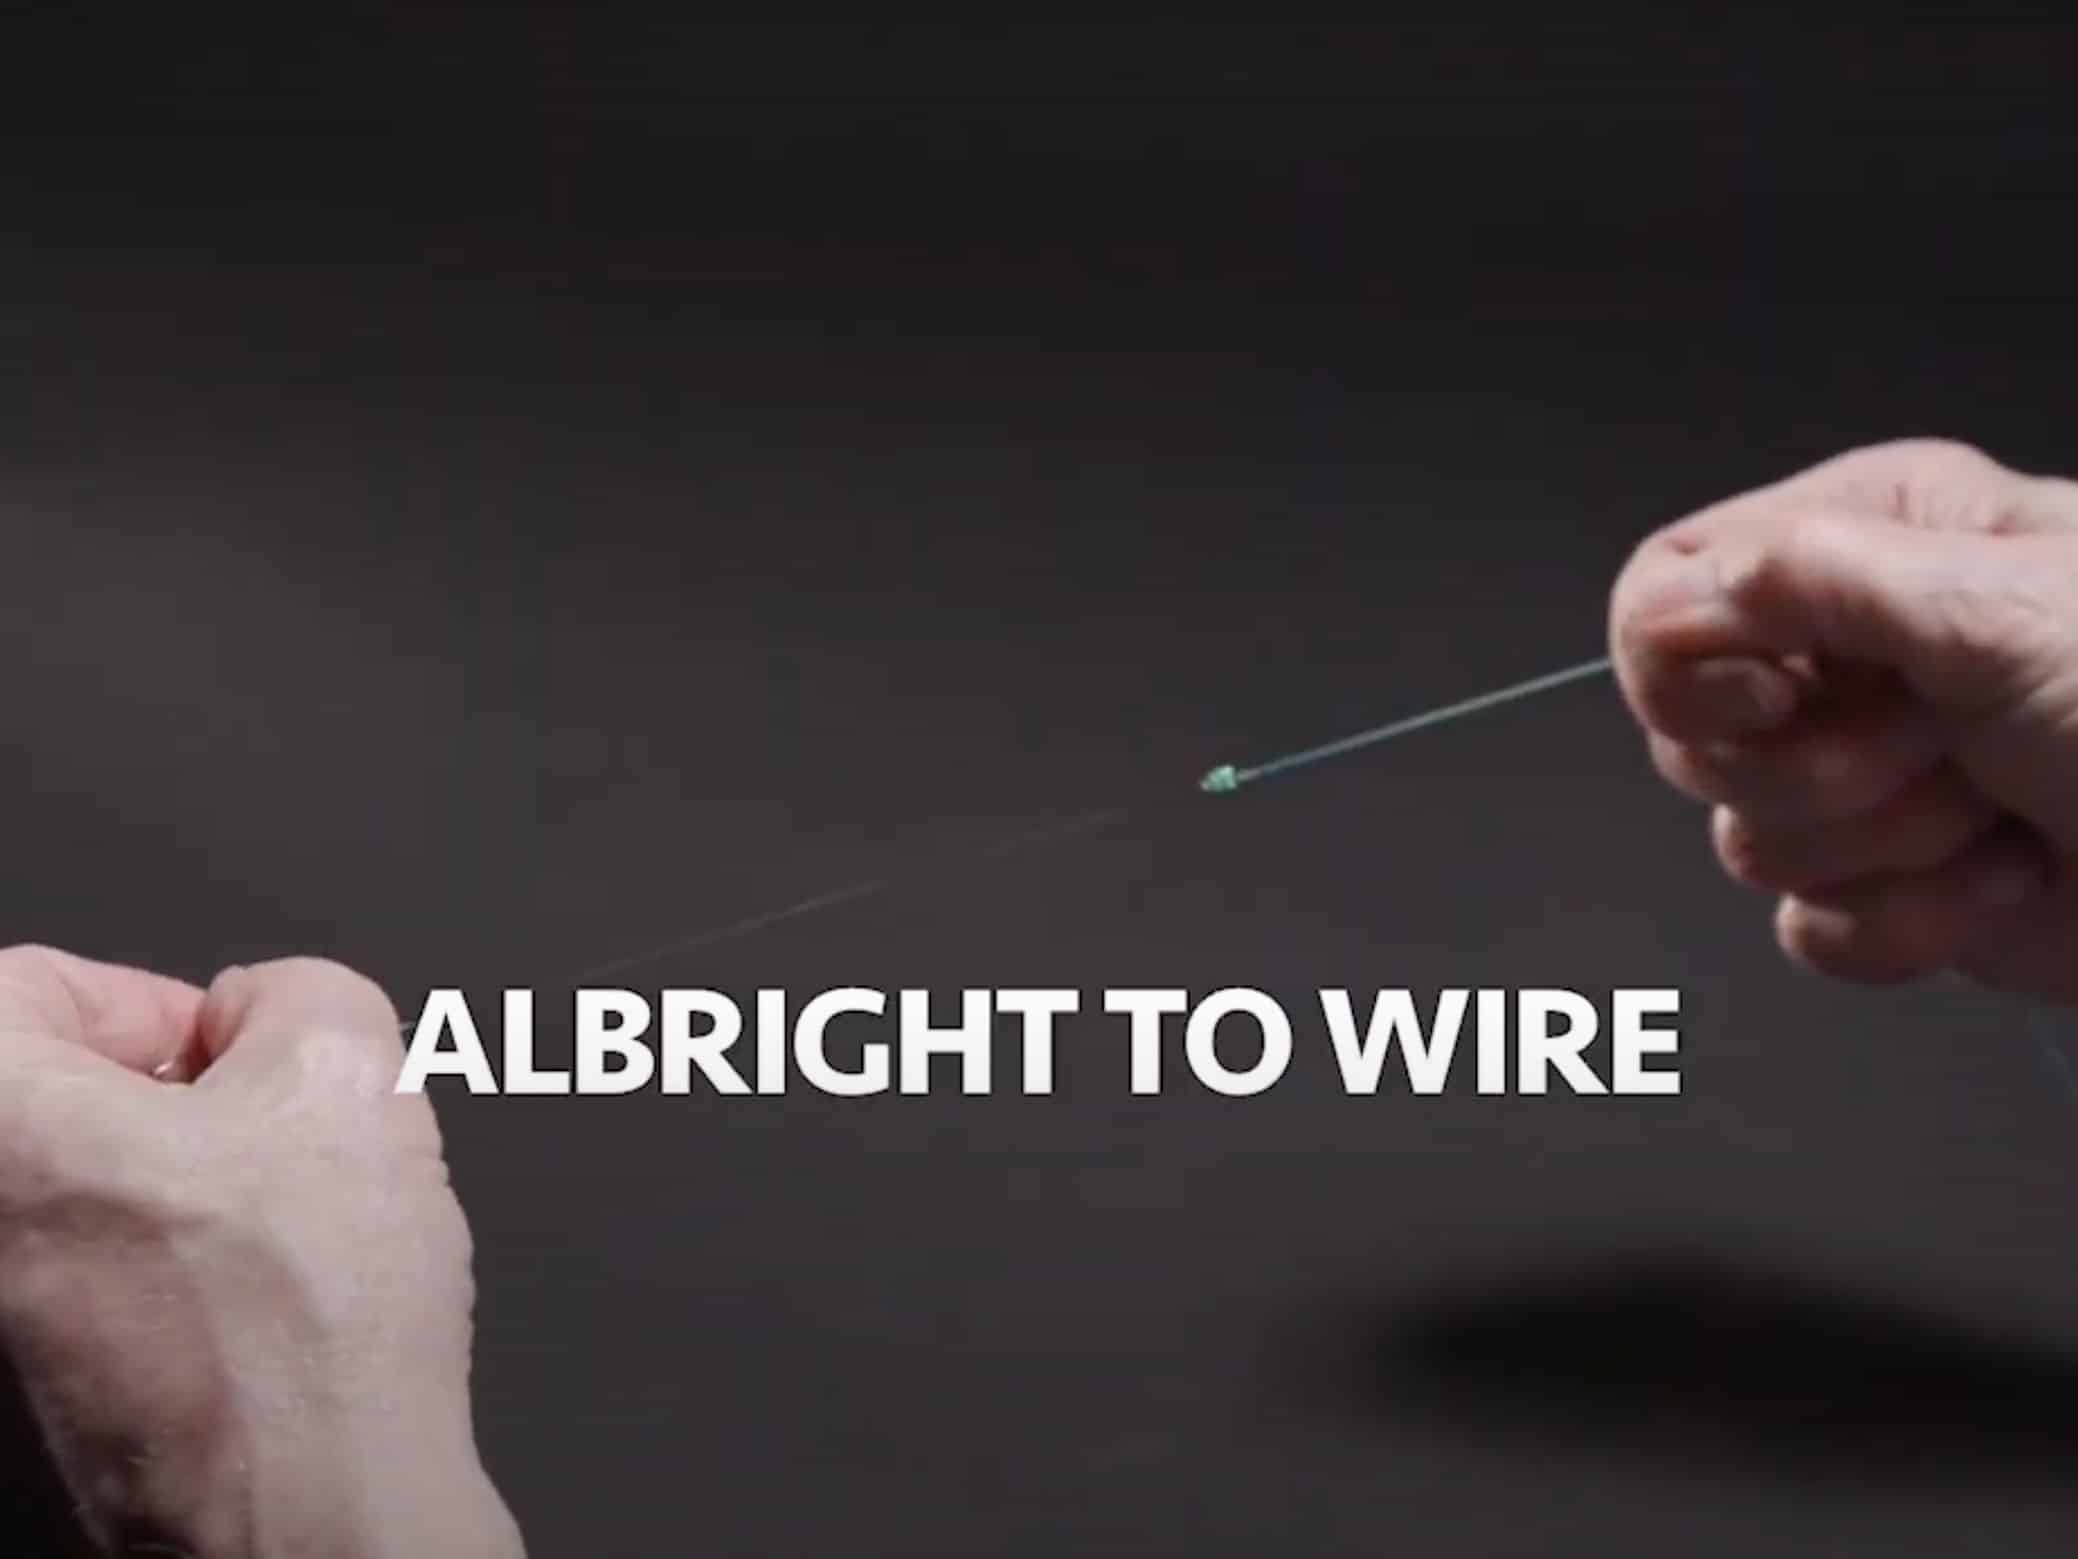 How to Tie an Albright to Wire Knot